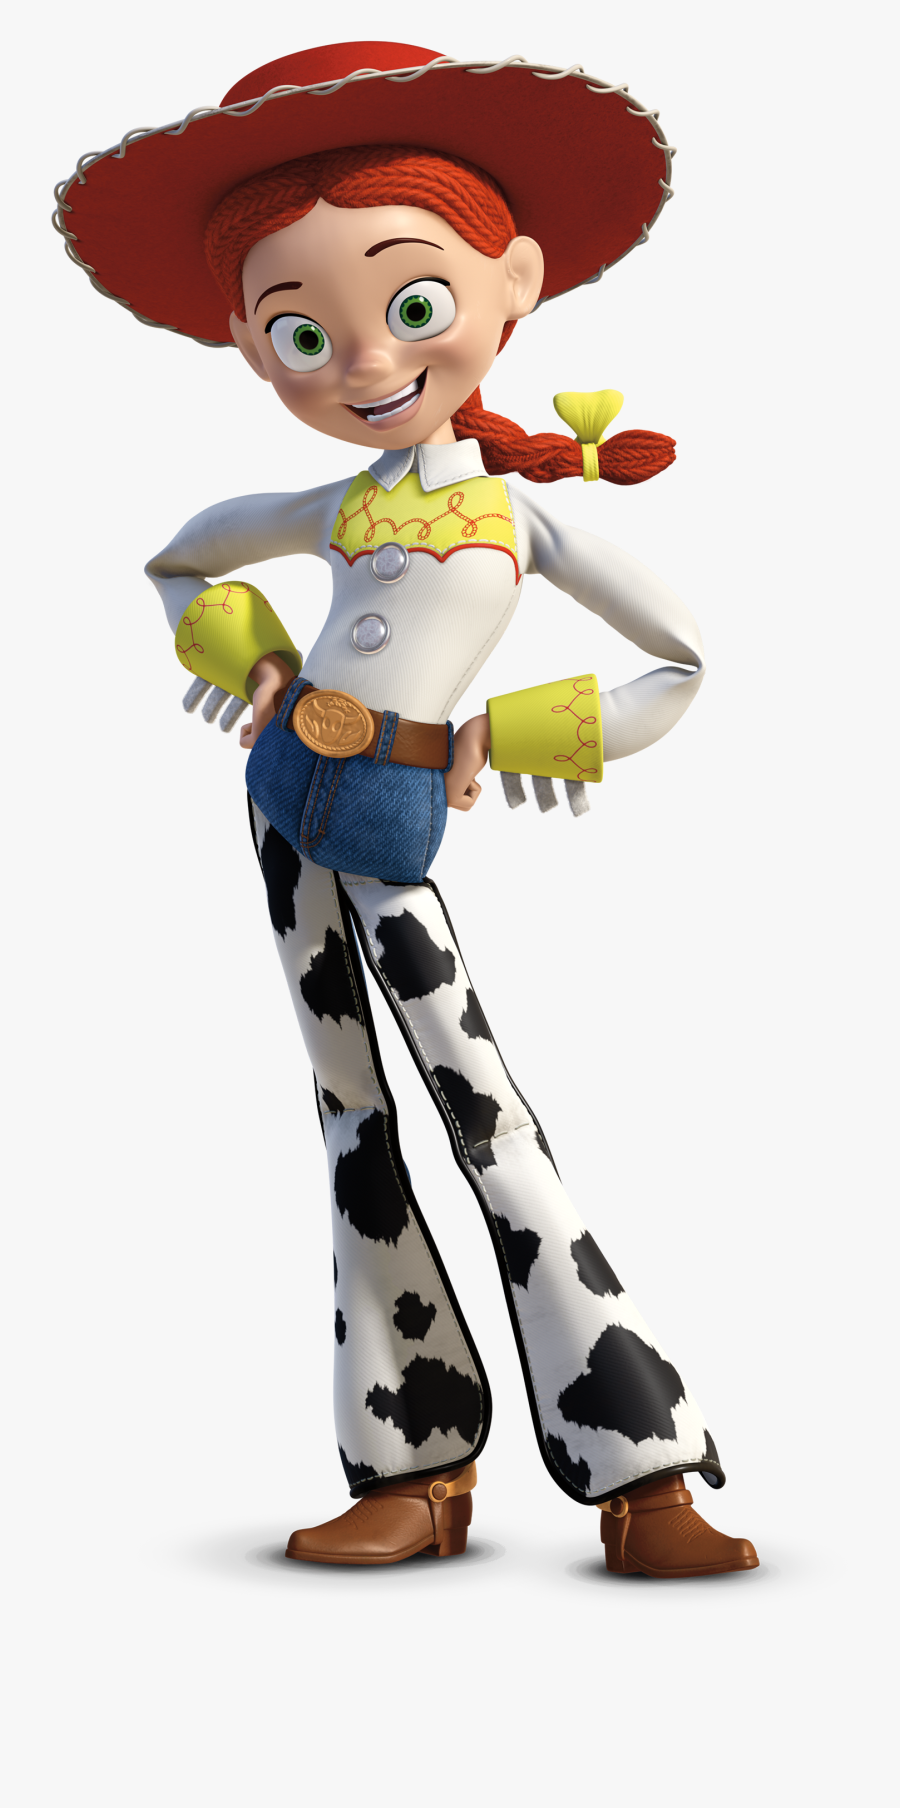 Image - Jessie Toy Story, Transparent Clipart